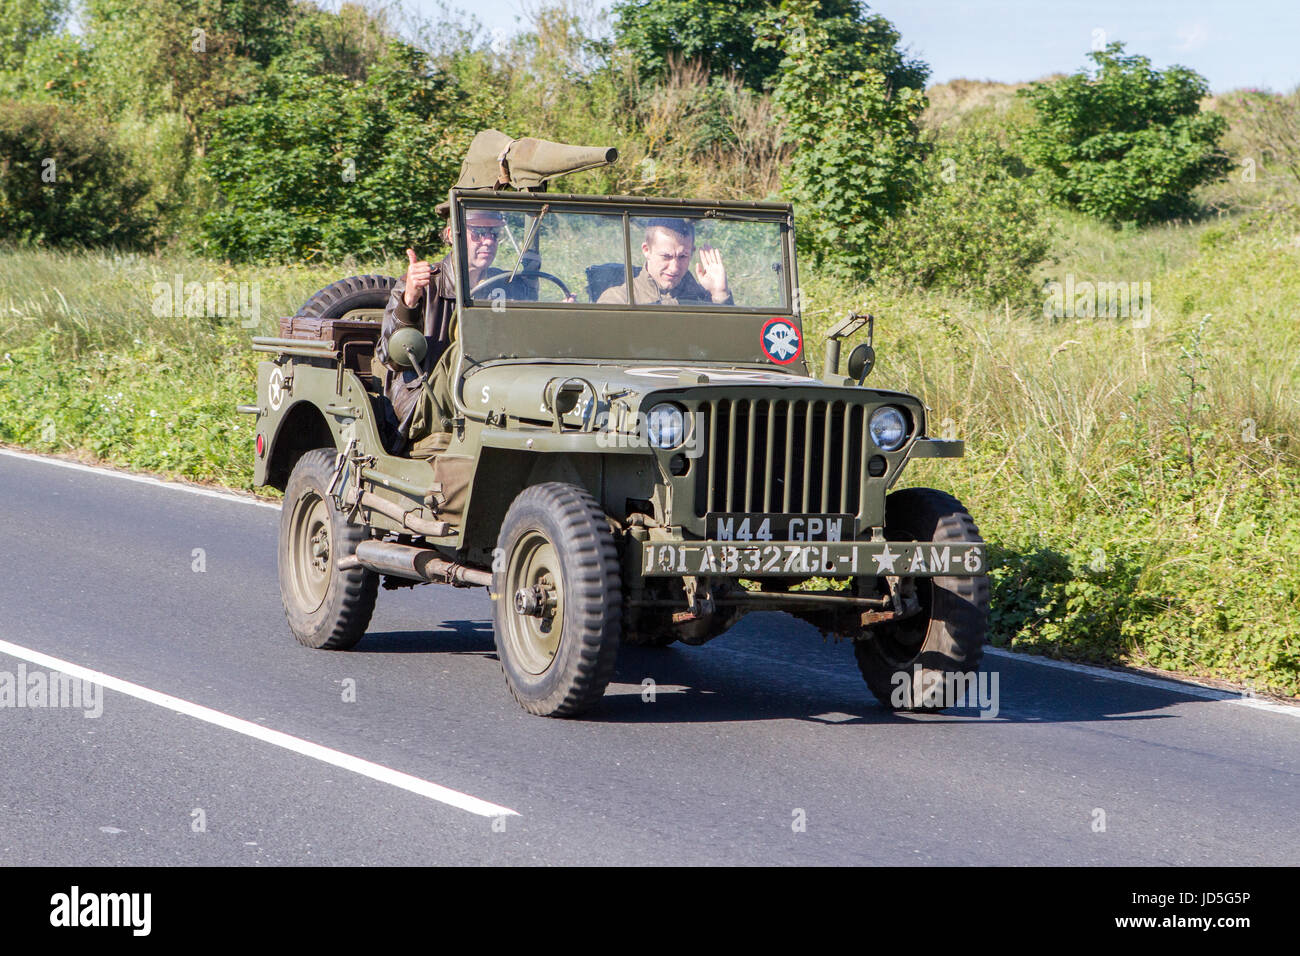 A Mahindra army military jeep travels along the coast road to attend the Southport motorfest in Merseyside. Stock Photo